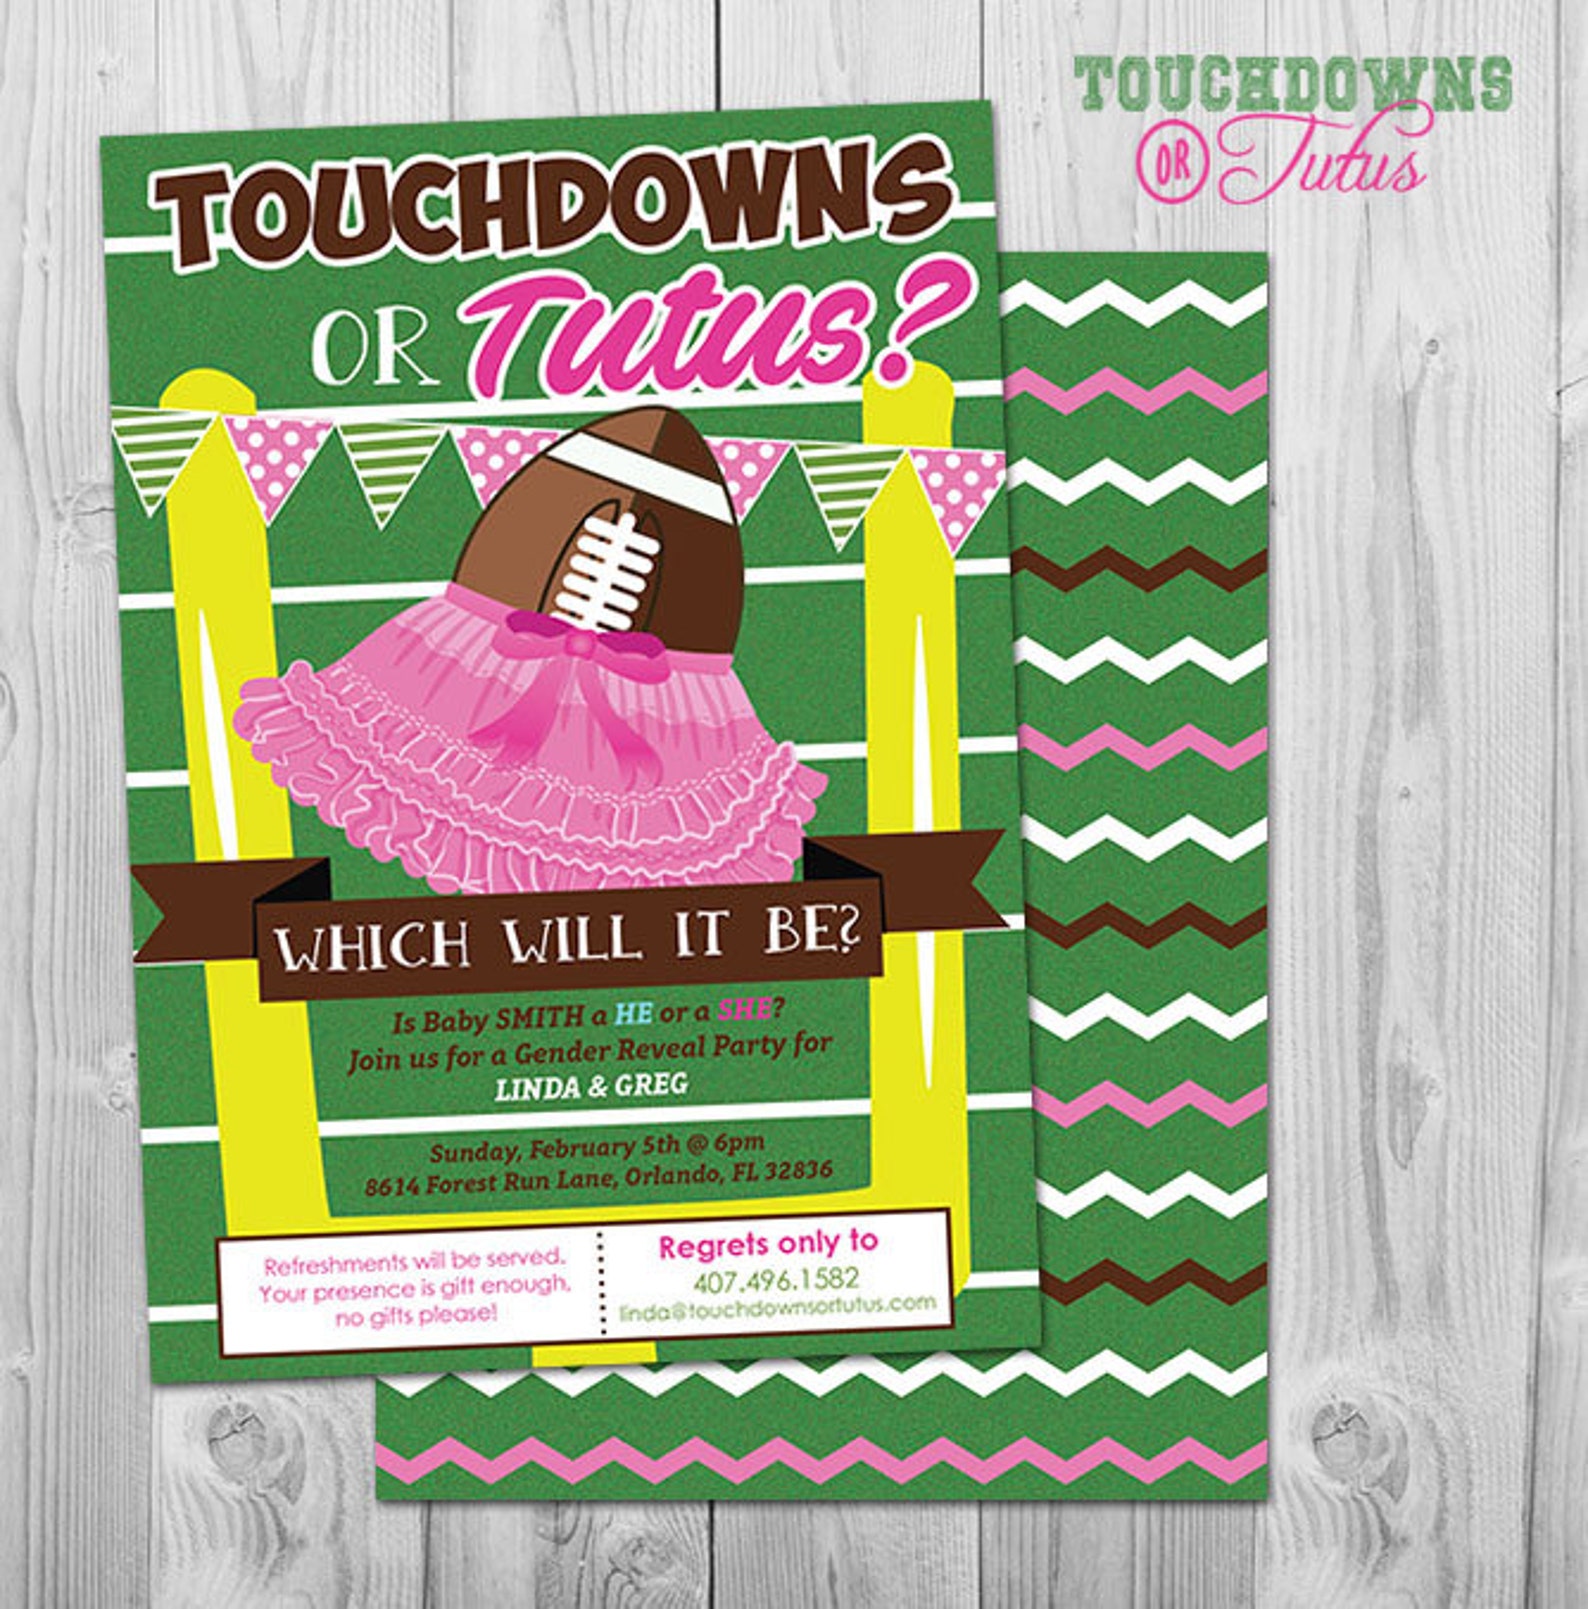 Football Gender Reveal Tutus or Touchdowns Invitation - Etsy